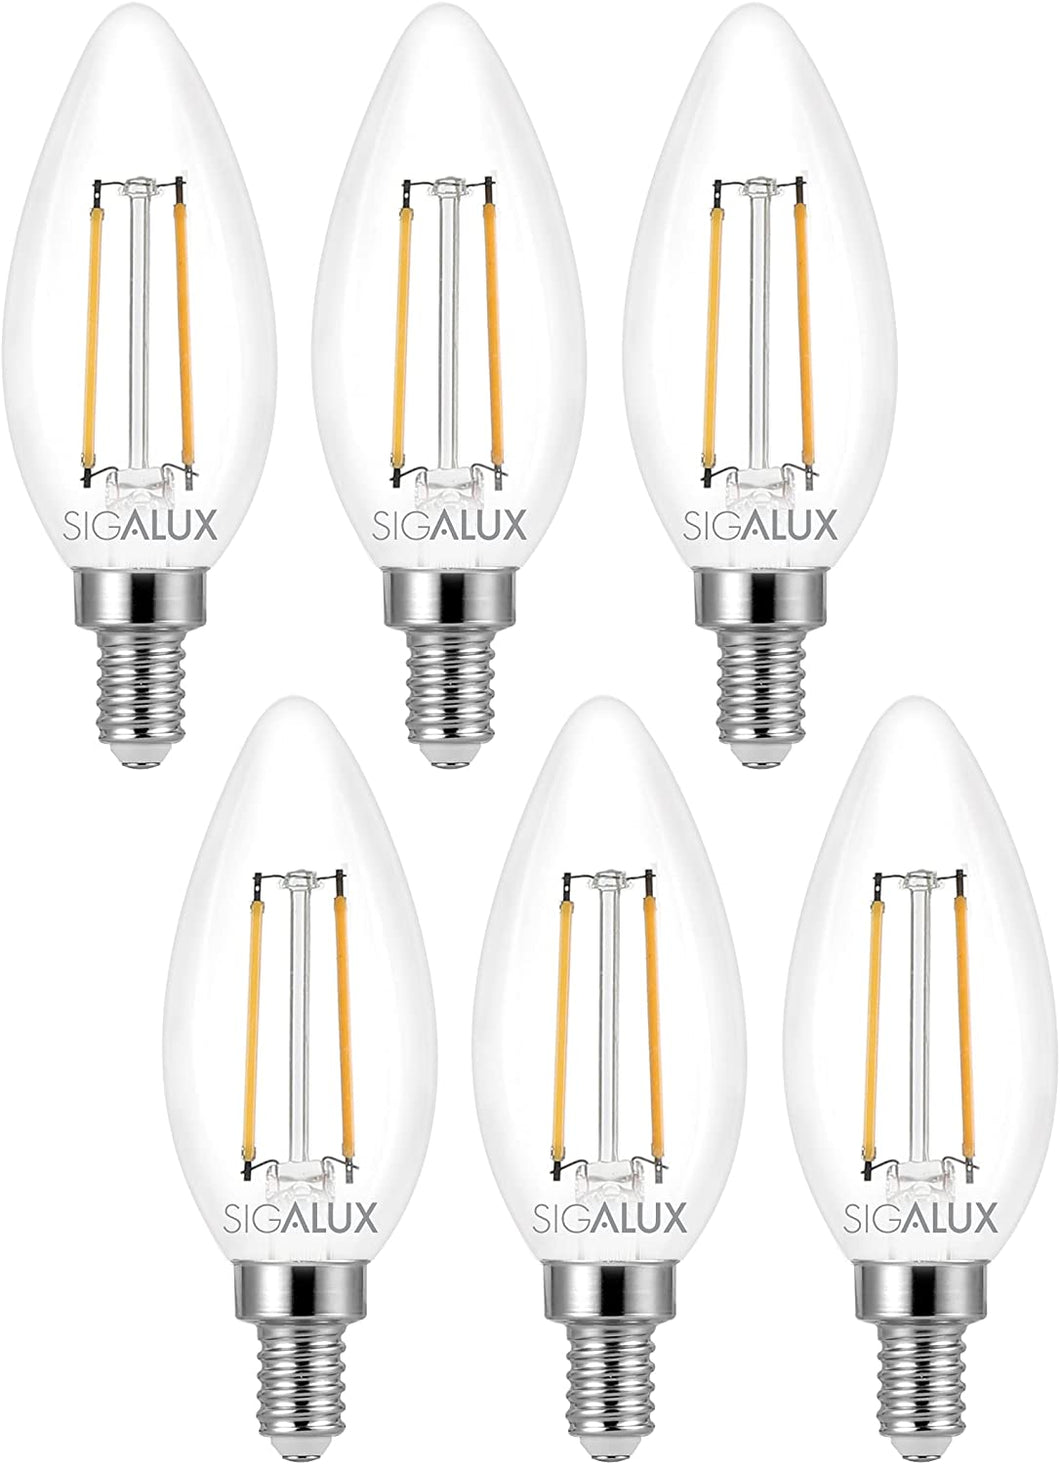 40W Equiv. Clear Glass Filament B11/E12 Soft White Dimmable LED Bulb